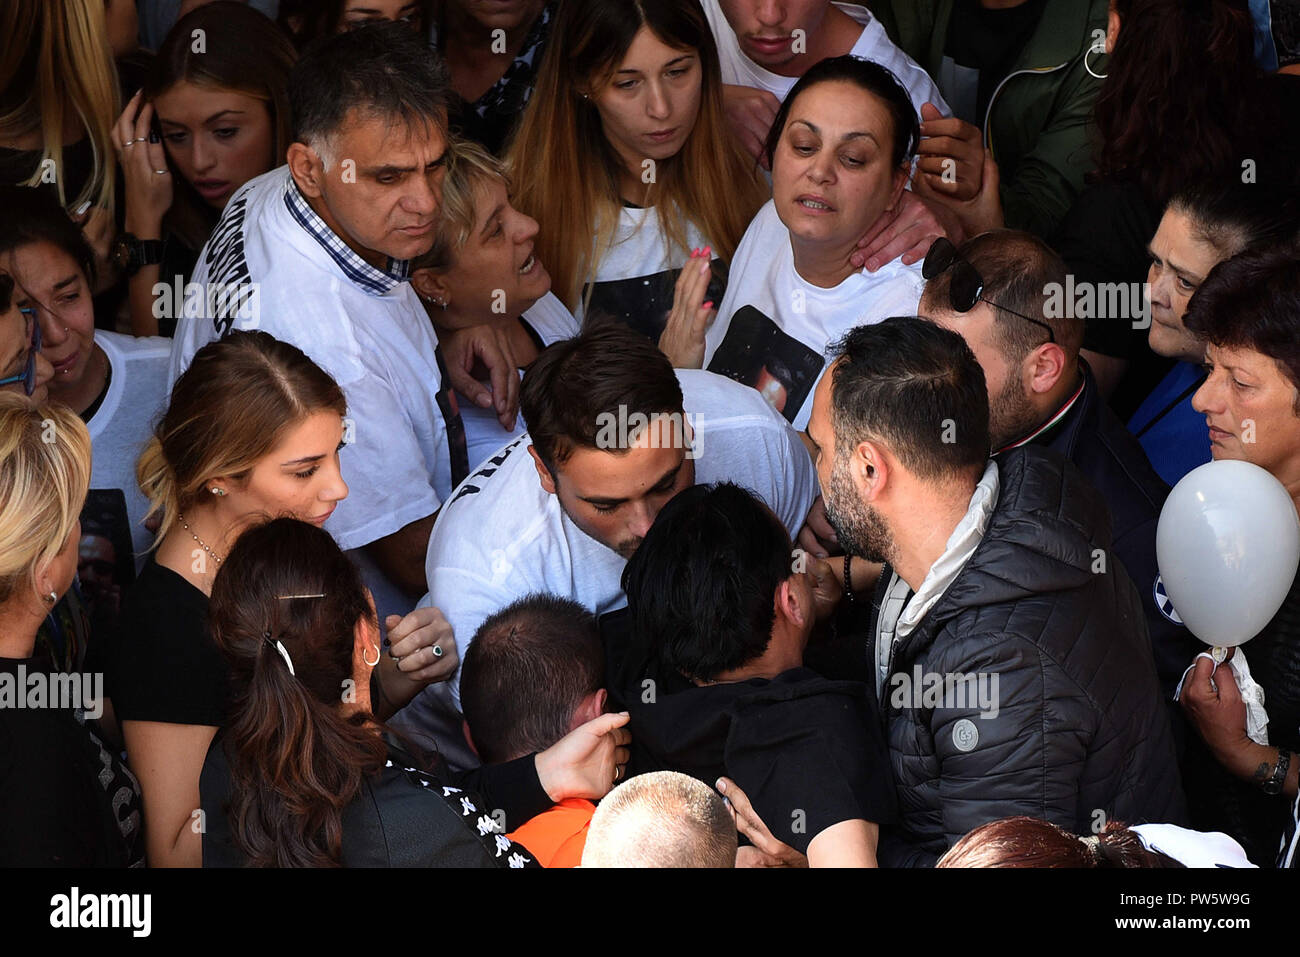 Naples, a moment of the funeral of Raffaele Perinelli, at the church of Sant'Alfonso and San Gerardo in via Janfolla in Miano. The 21-year-old football player was stabbed in the chest and killed Saturday night after a fight with a neighbor. 12/10/2018, Naples, Italy Stock Photo